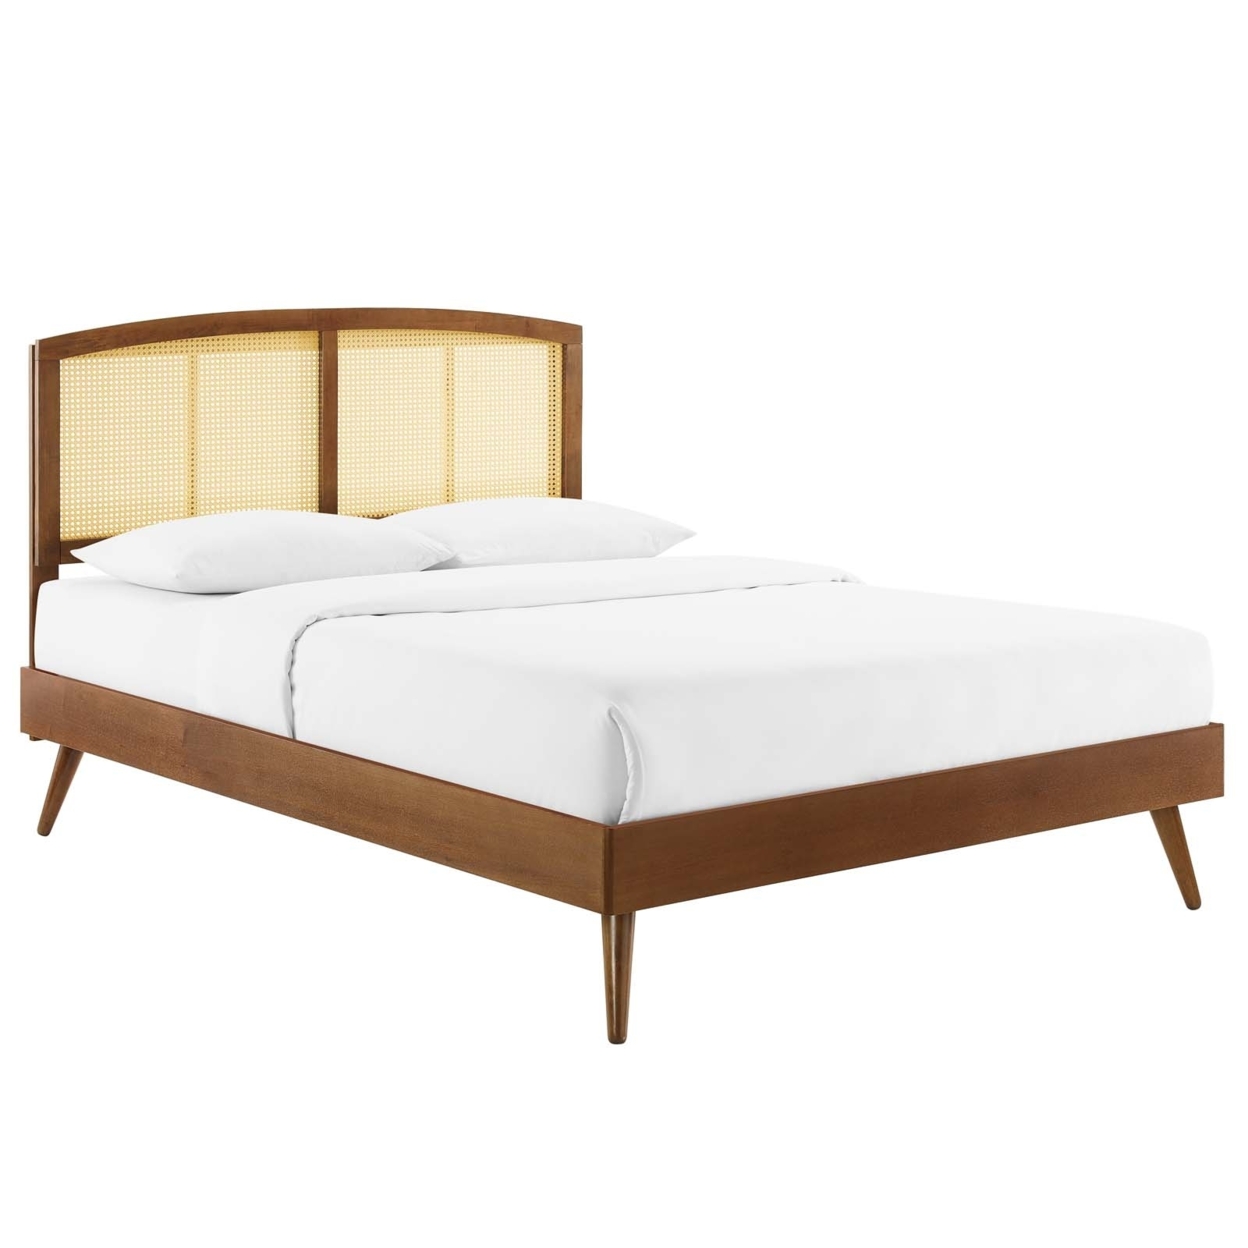 Sierra Cane And Wood King Platform Bed With Splayed Legs, Walnut